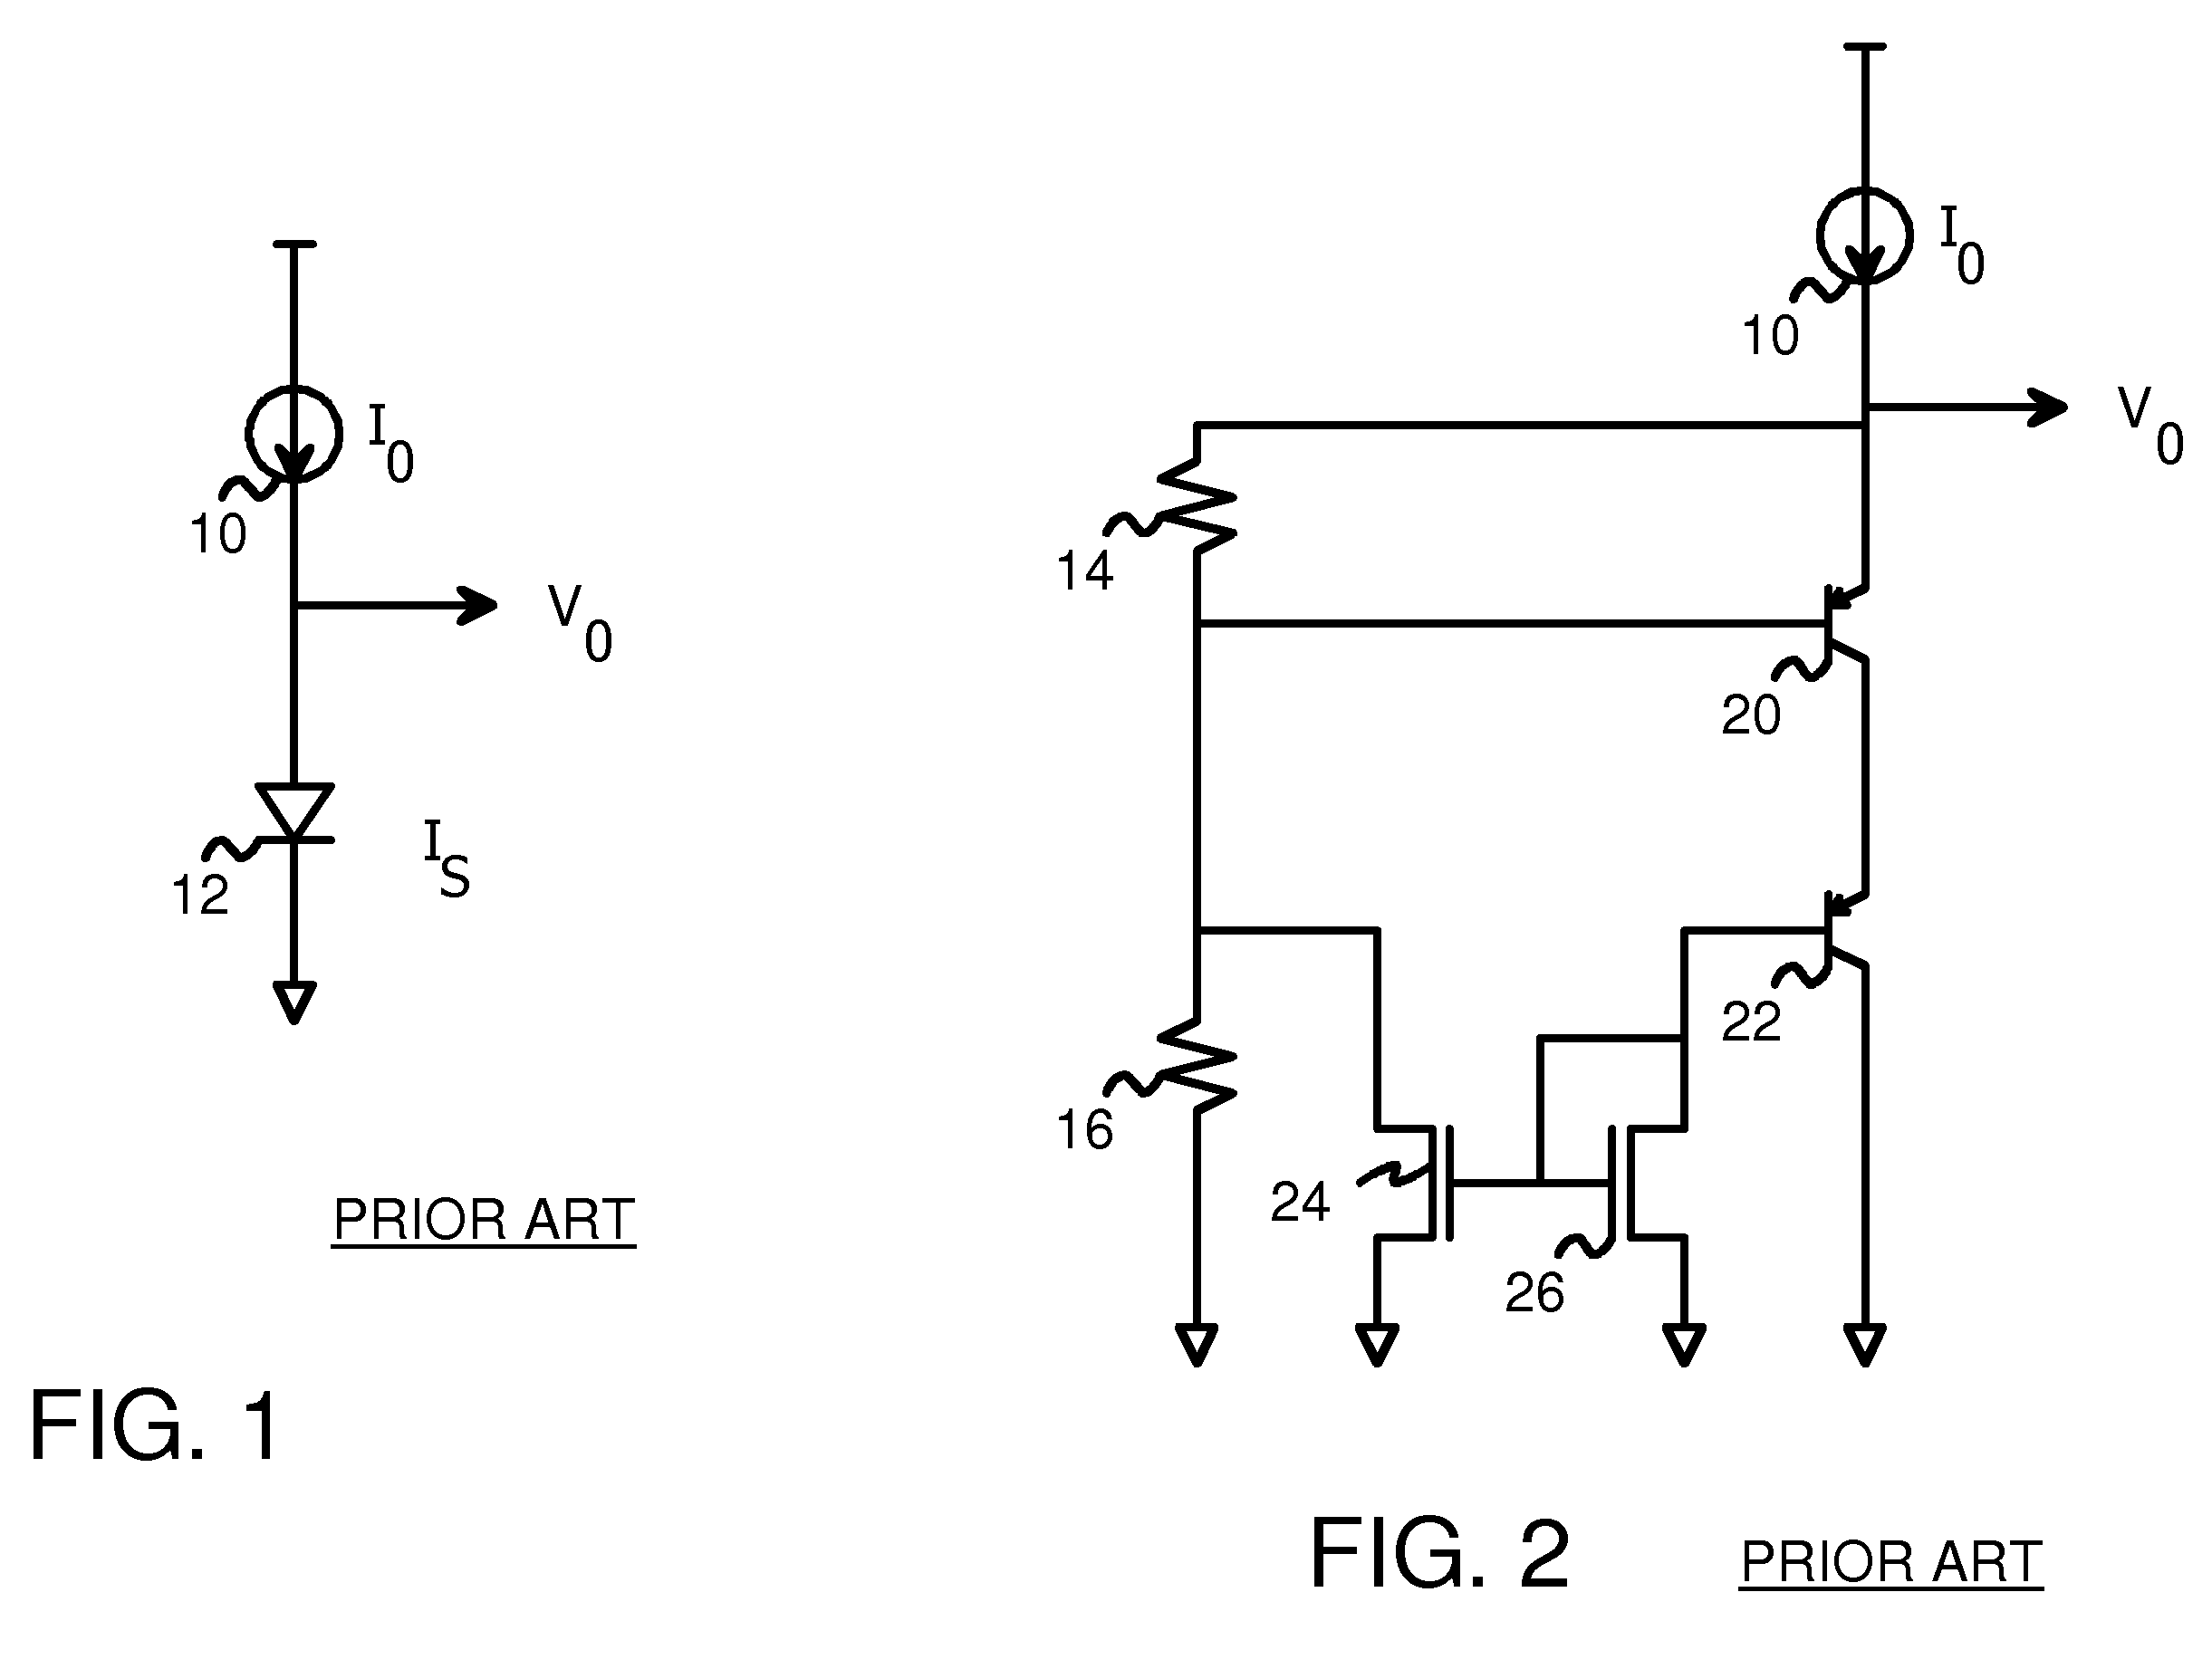 CMOS Temperature Sensor with Sensitivity Set by Current-Mirror and Resistor Ratios without Limiting DC Bias